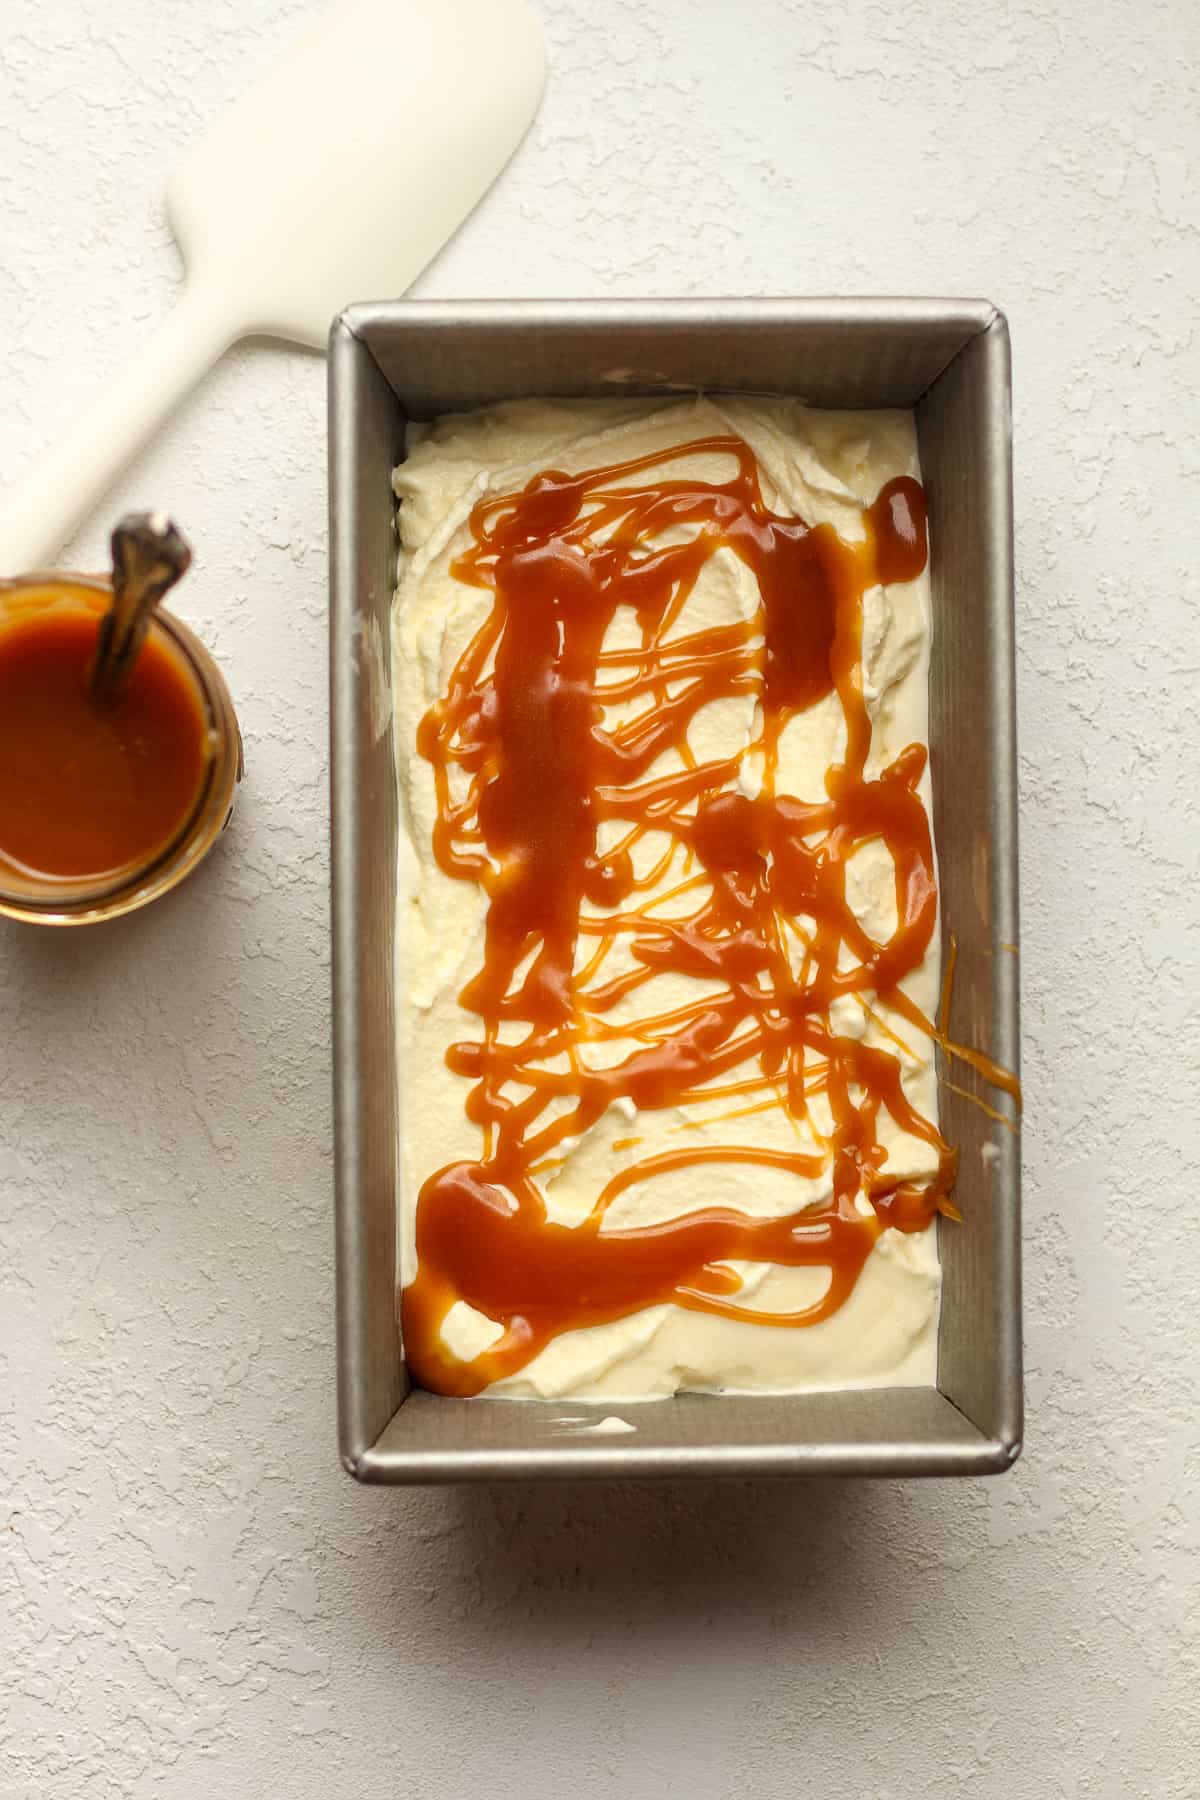 A pan of ice cream with a layer of caramel drizzle.